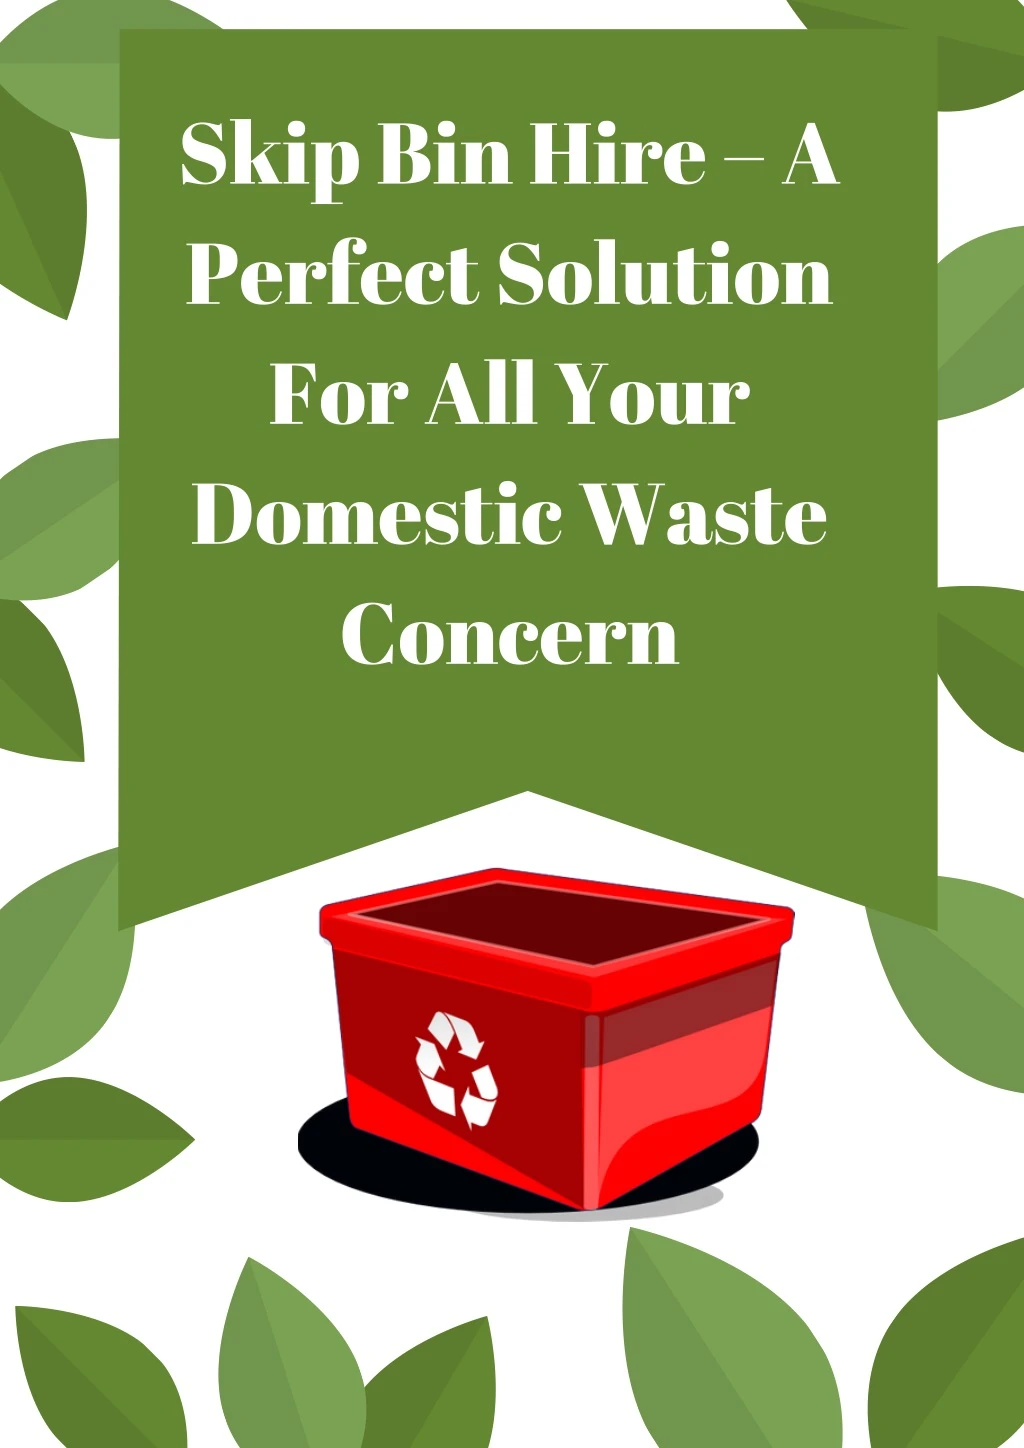 skip bin hire a perfect solution for all your